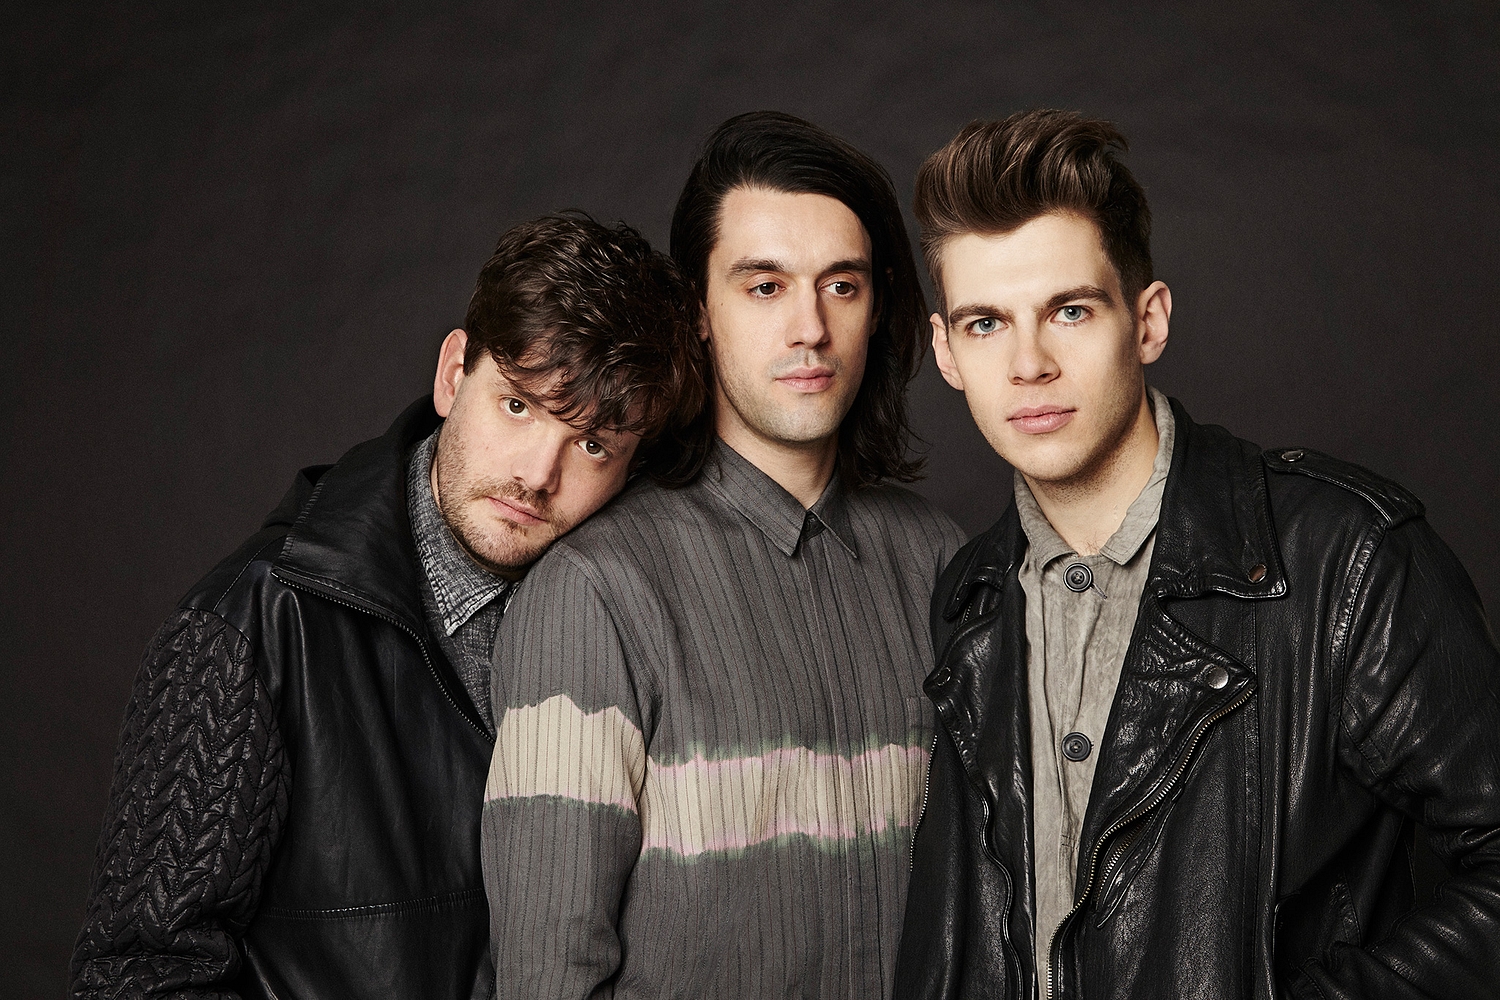 Klaxons: “We’re a pop group trying to make hits for the radio, and it’s working”